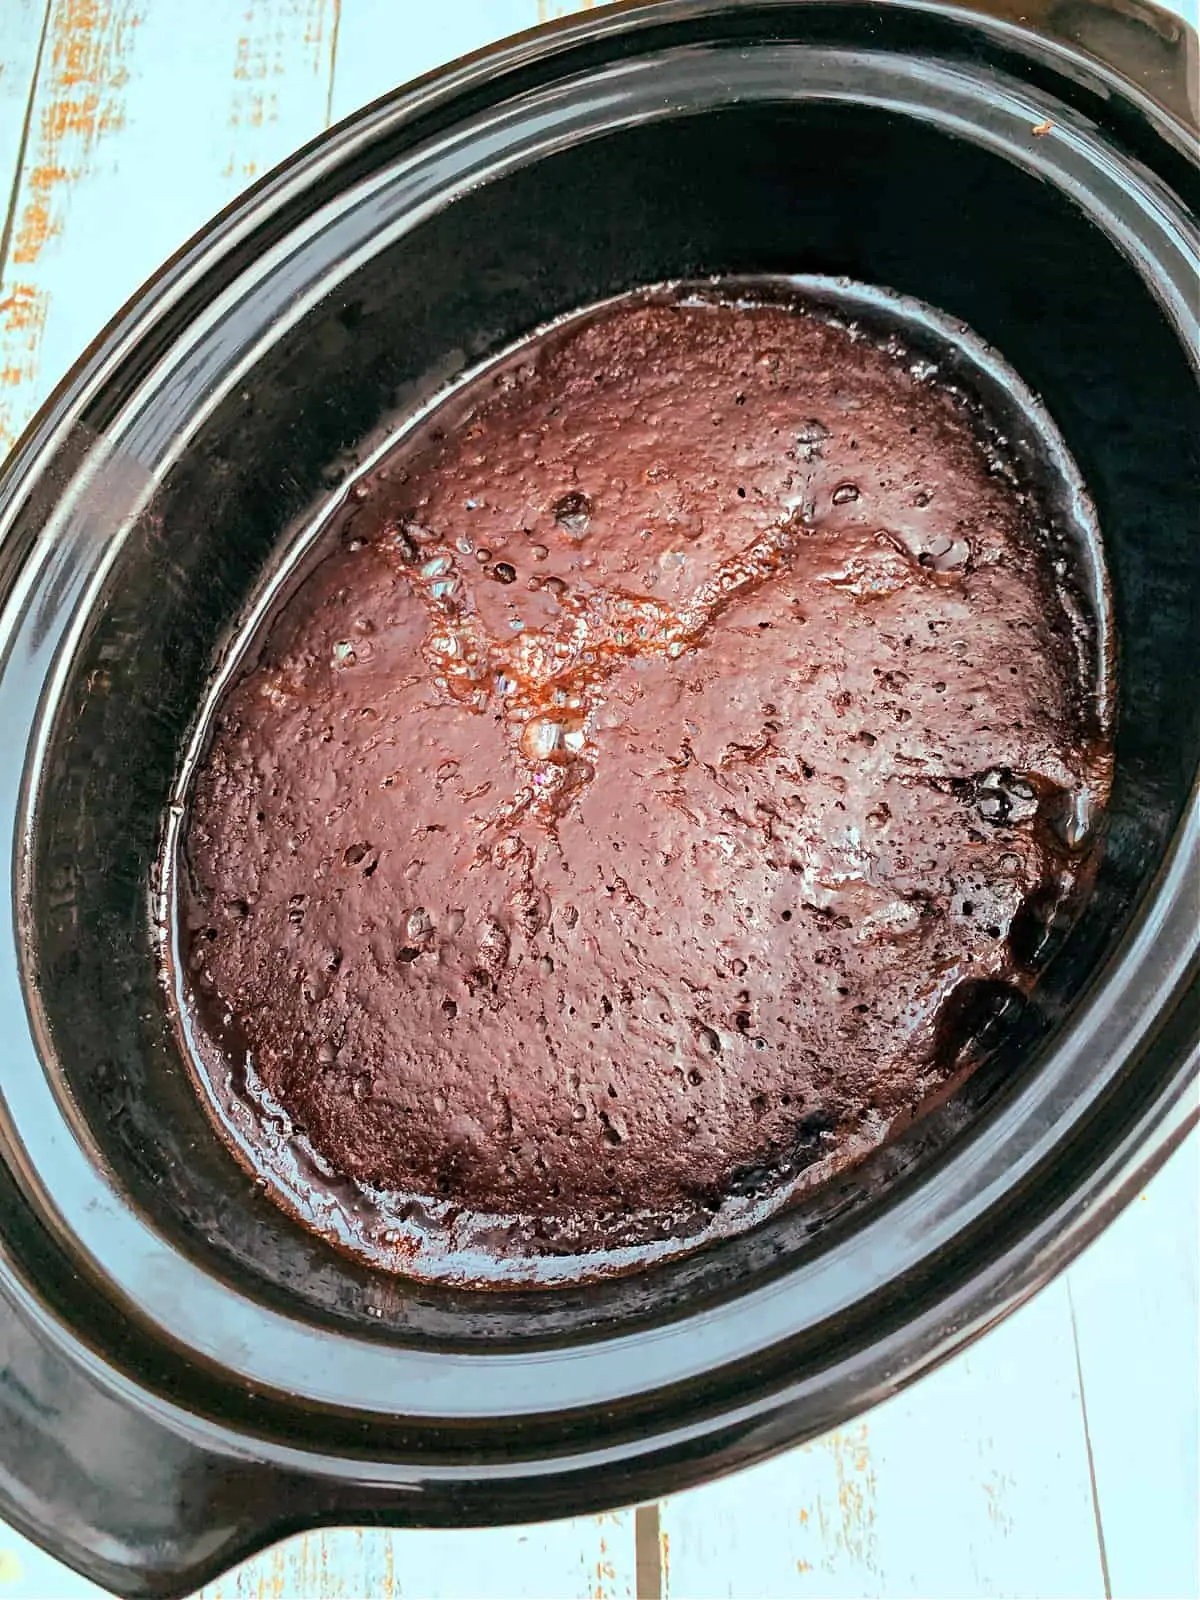 Chocolate orange pudding after baking, with a rich chocolate sponge cake layer over a chocolate sauce.